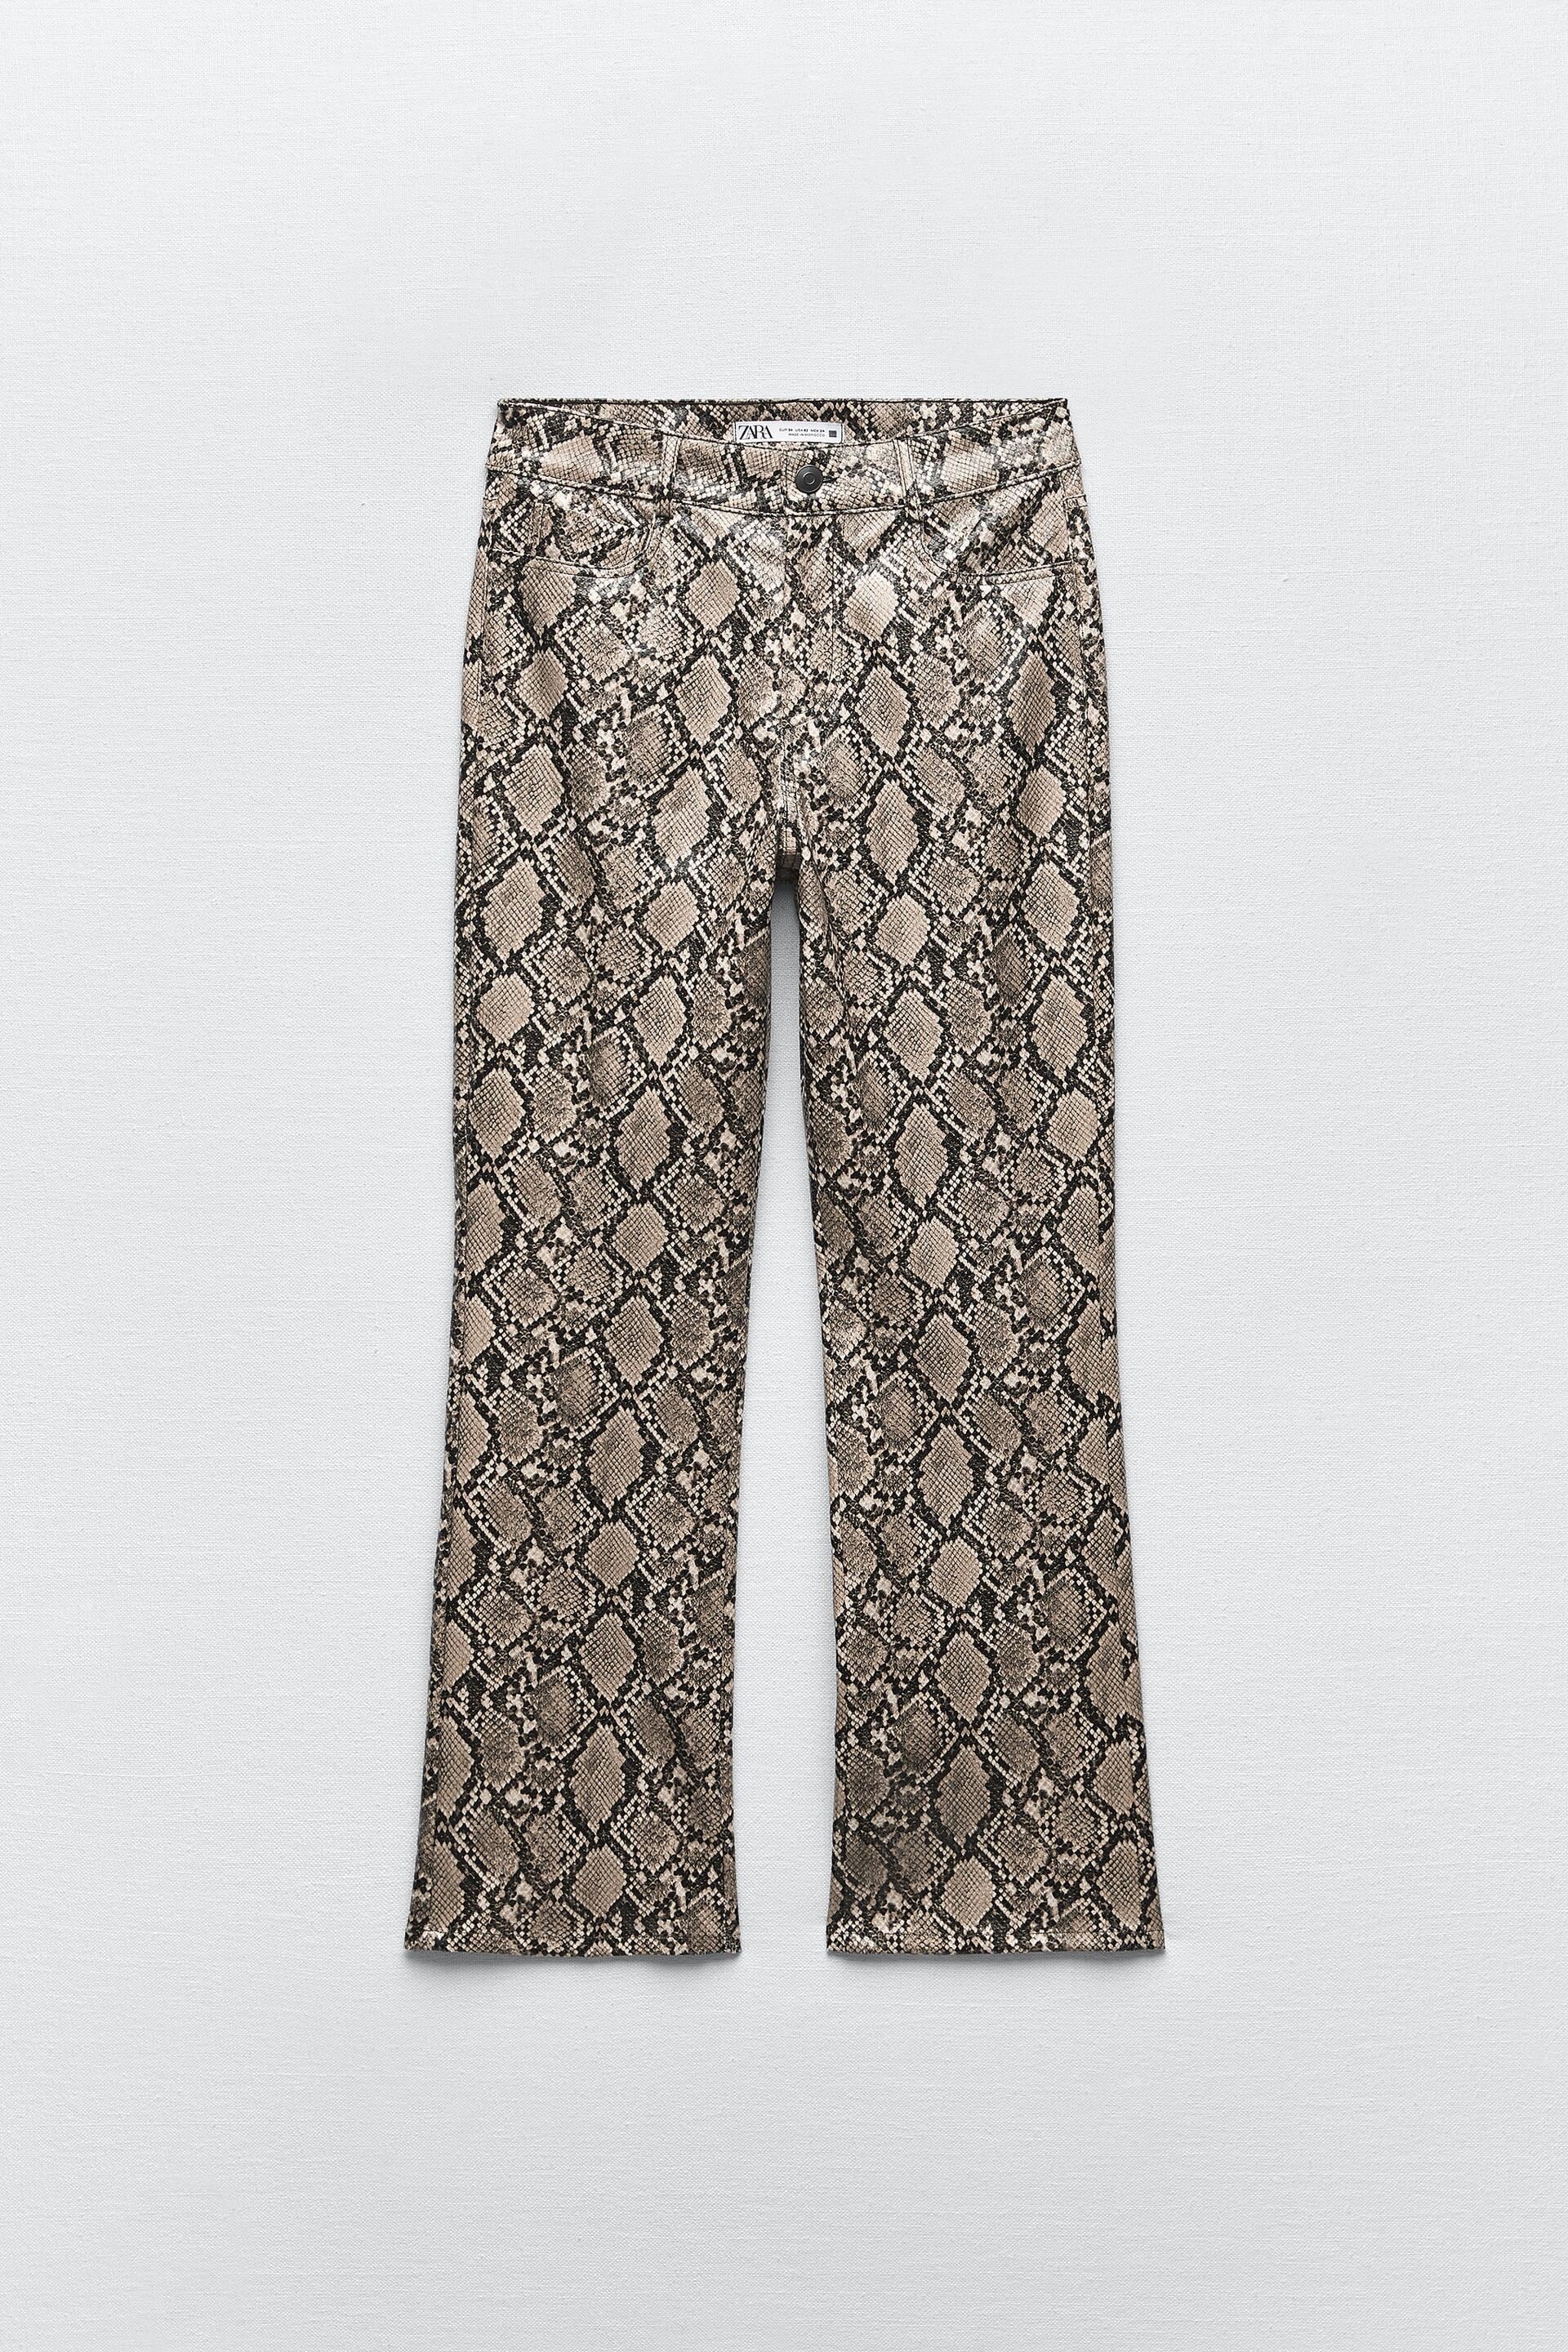 ZARA SNAKE PRINT TROUSERS WITH POCKETS SIZE M